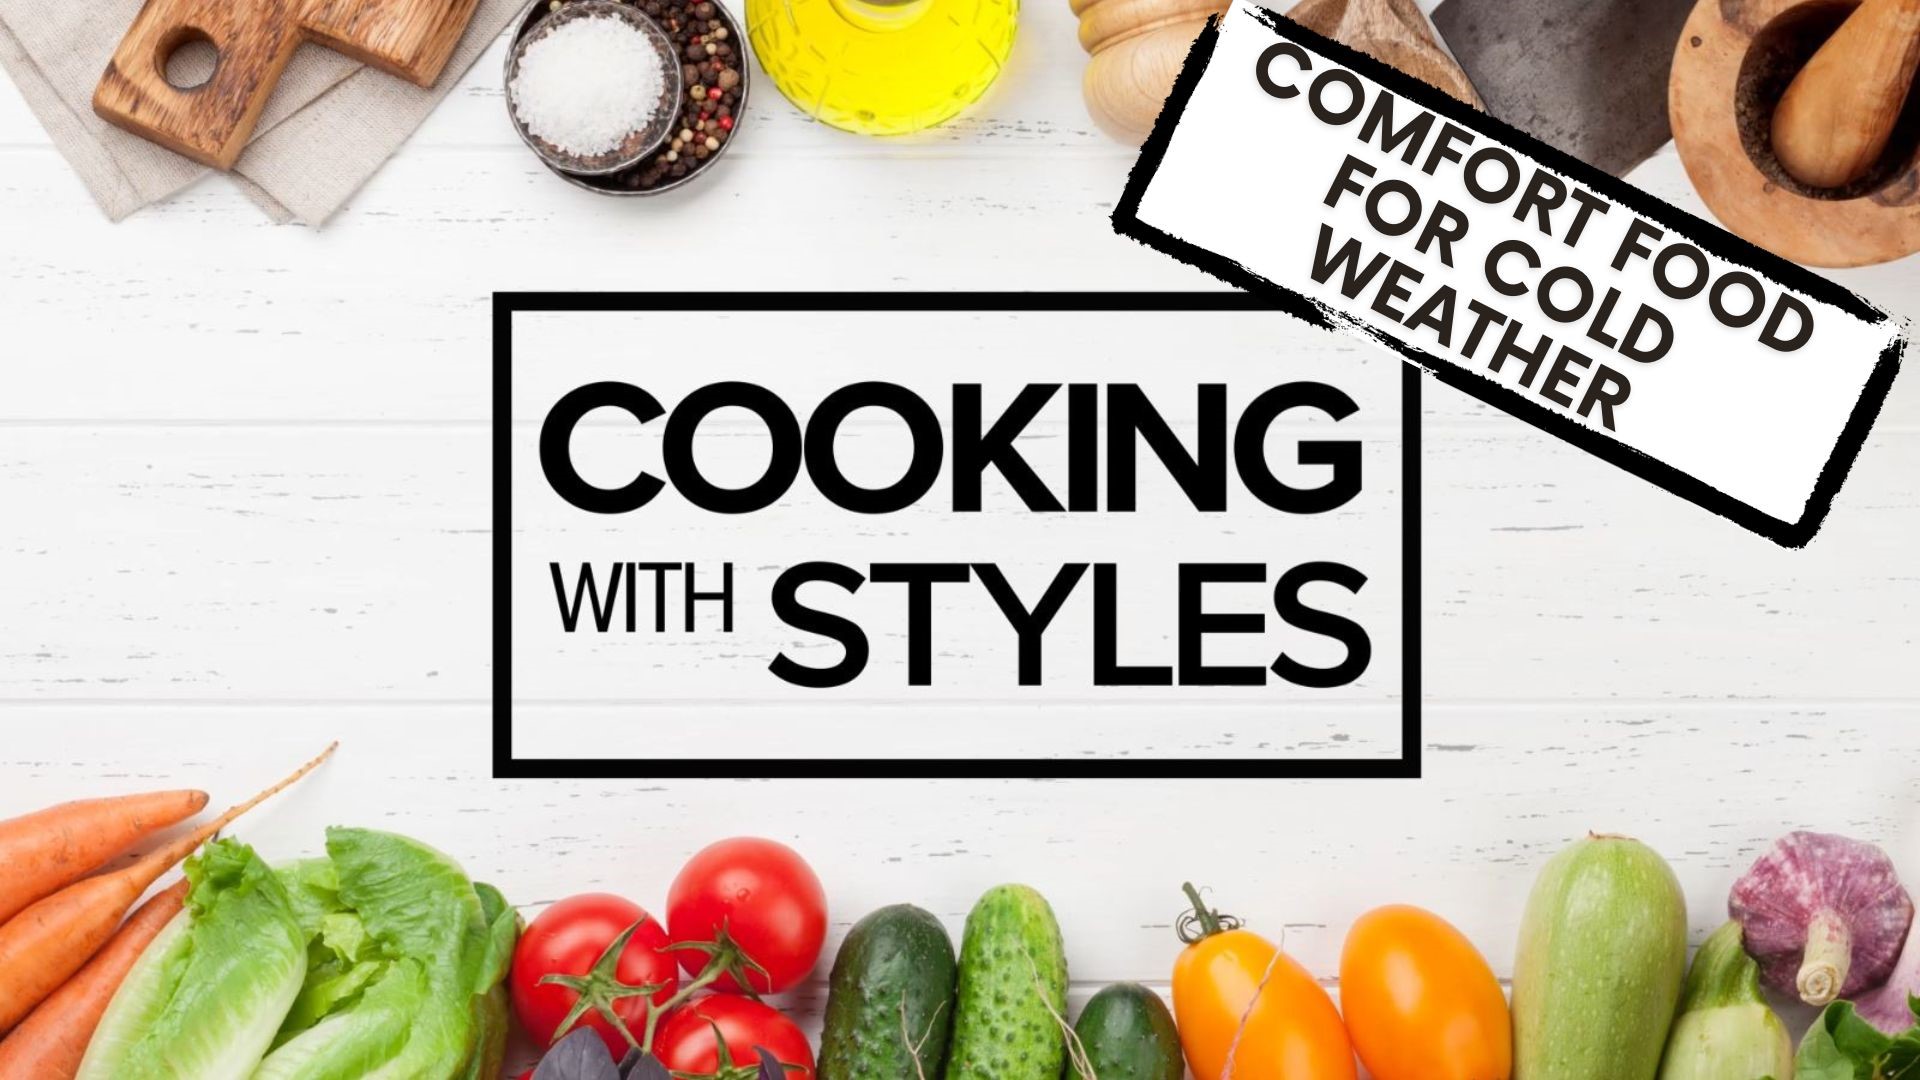 Shawn Styles shares some of his favorite comfort food recipes. From mac 'n' cheese to one pan chicken and biscuits, he has dishes to help keep you warm and cozy.